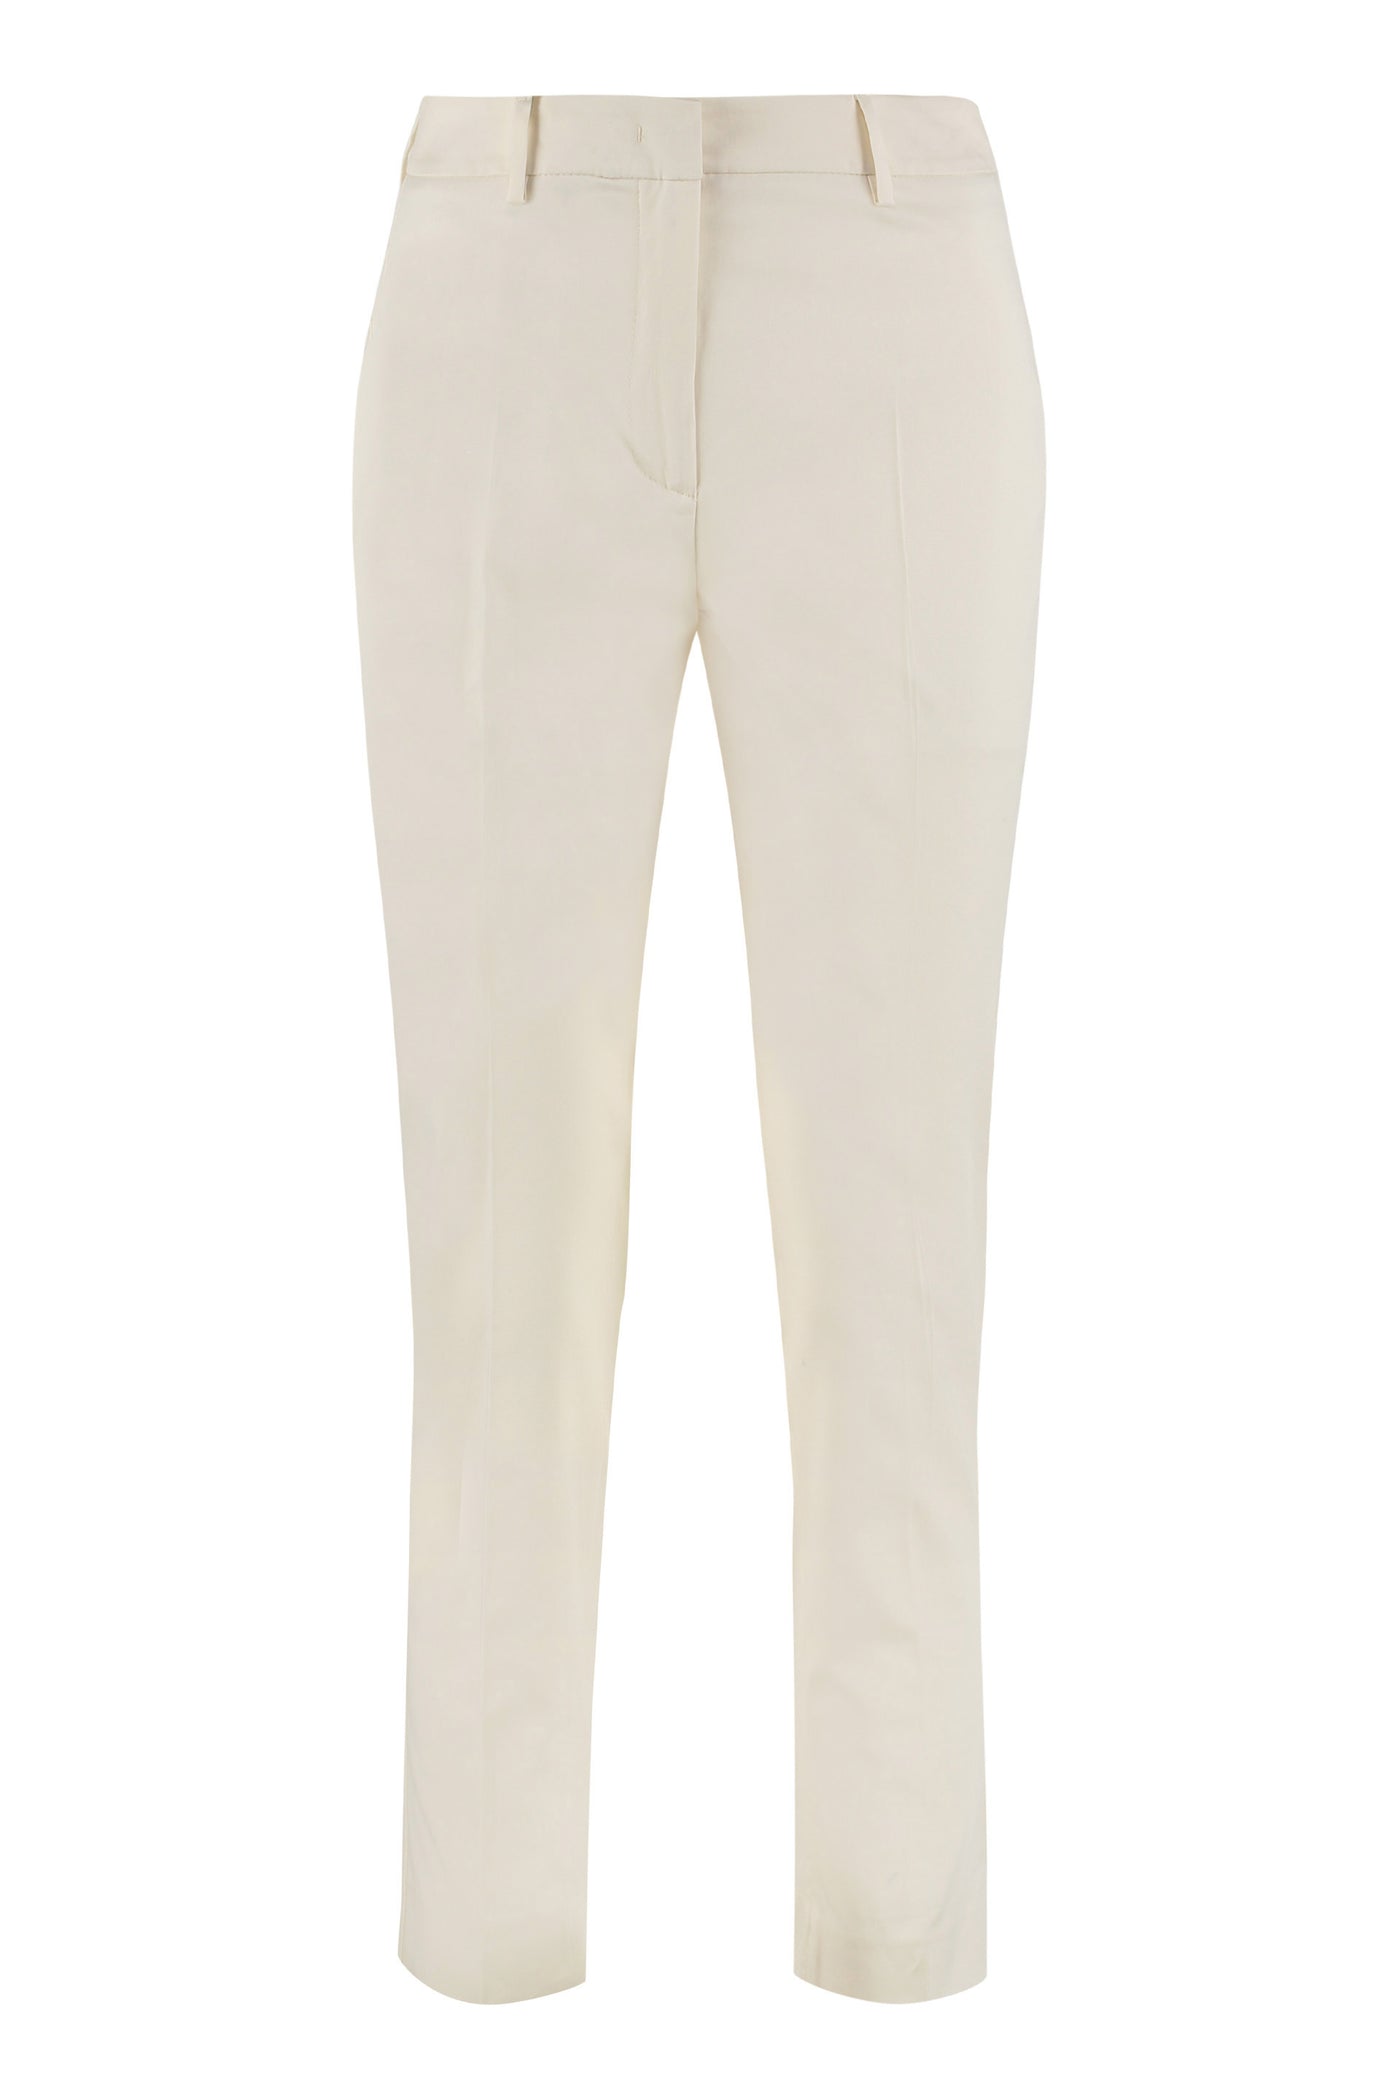 024 WEEKEND MAX MARA STRETCH COTTON STOVEPIPE TROUSERS